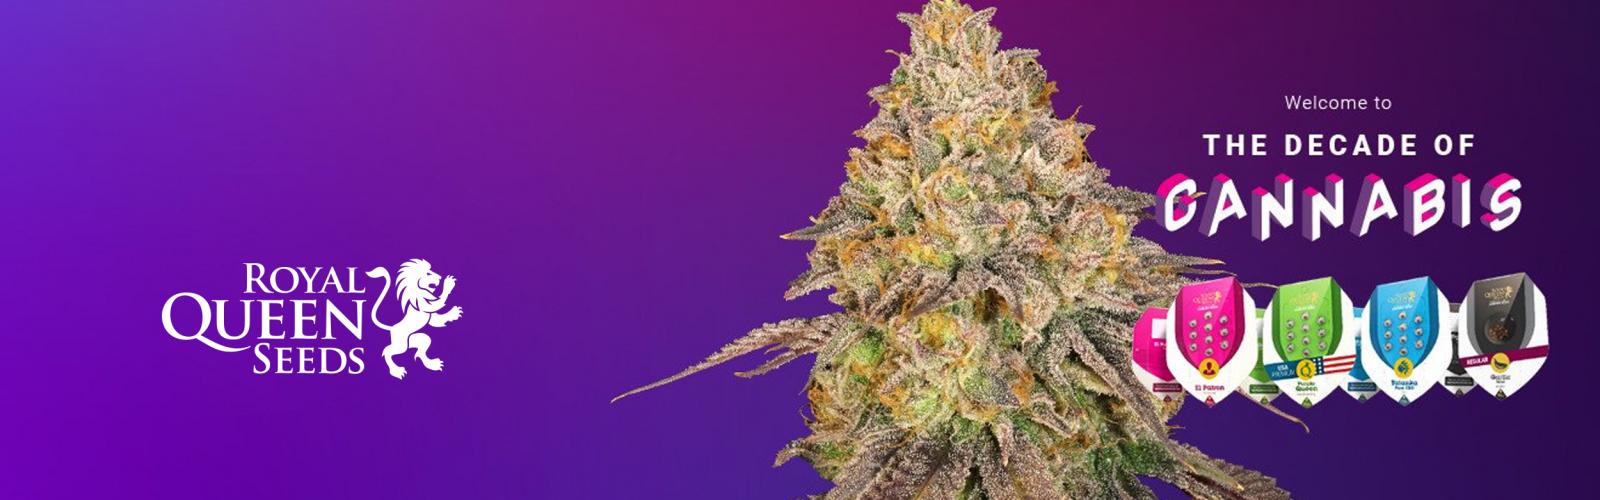 Royal Queen Seeds Feminised Cannabis Seeds